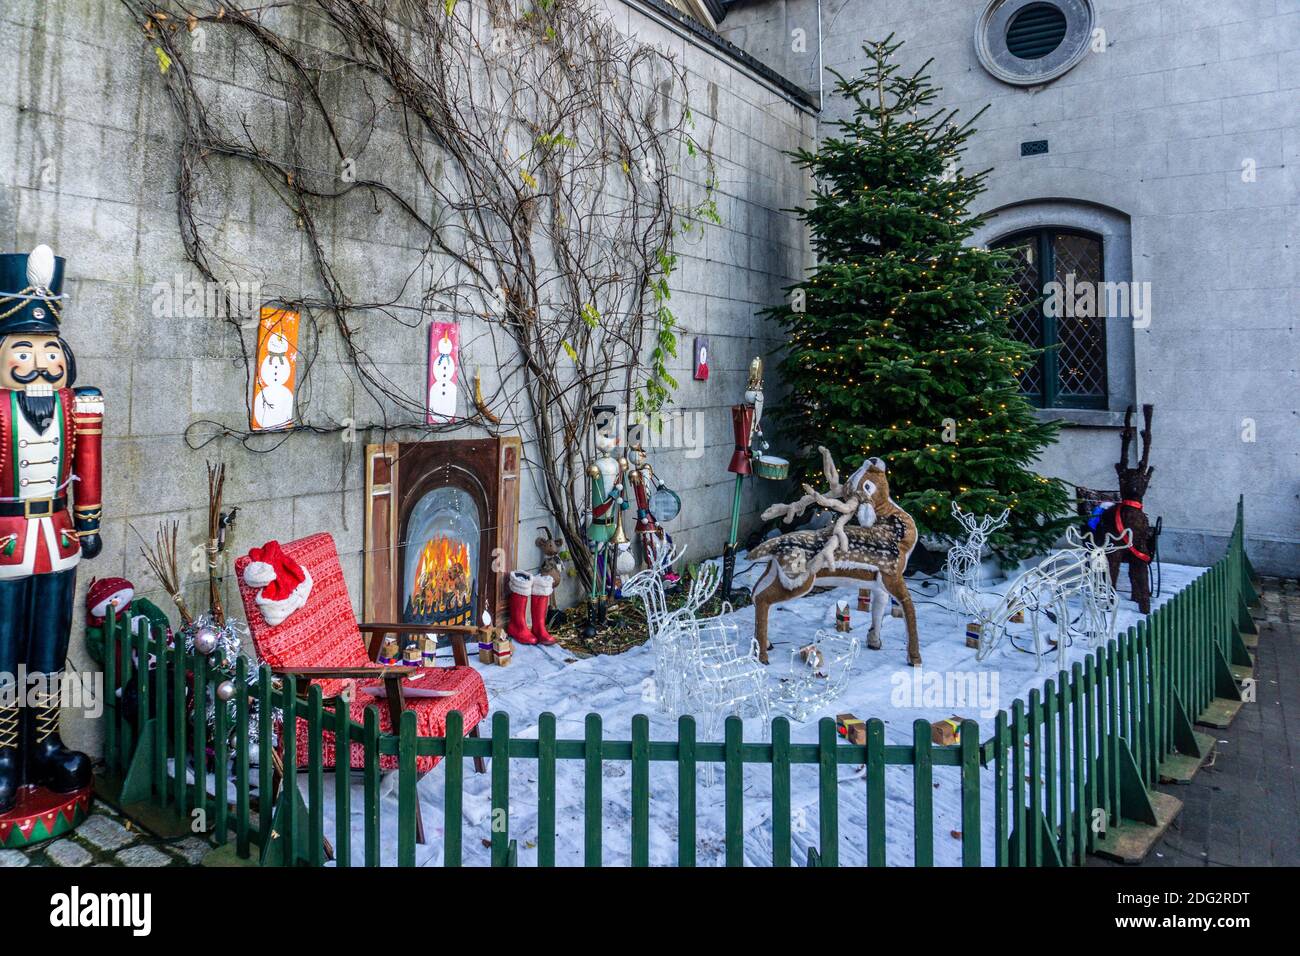 A Christmas scene in Farmleigh in West Dublin, Ireland, with snow on the  ground, a reindeer, a Christmas tree and an open fire Stock Photo - Alamy